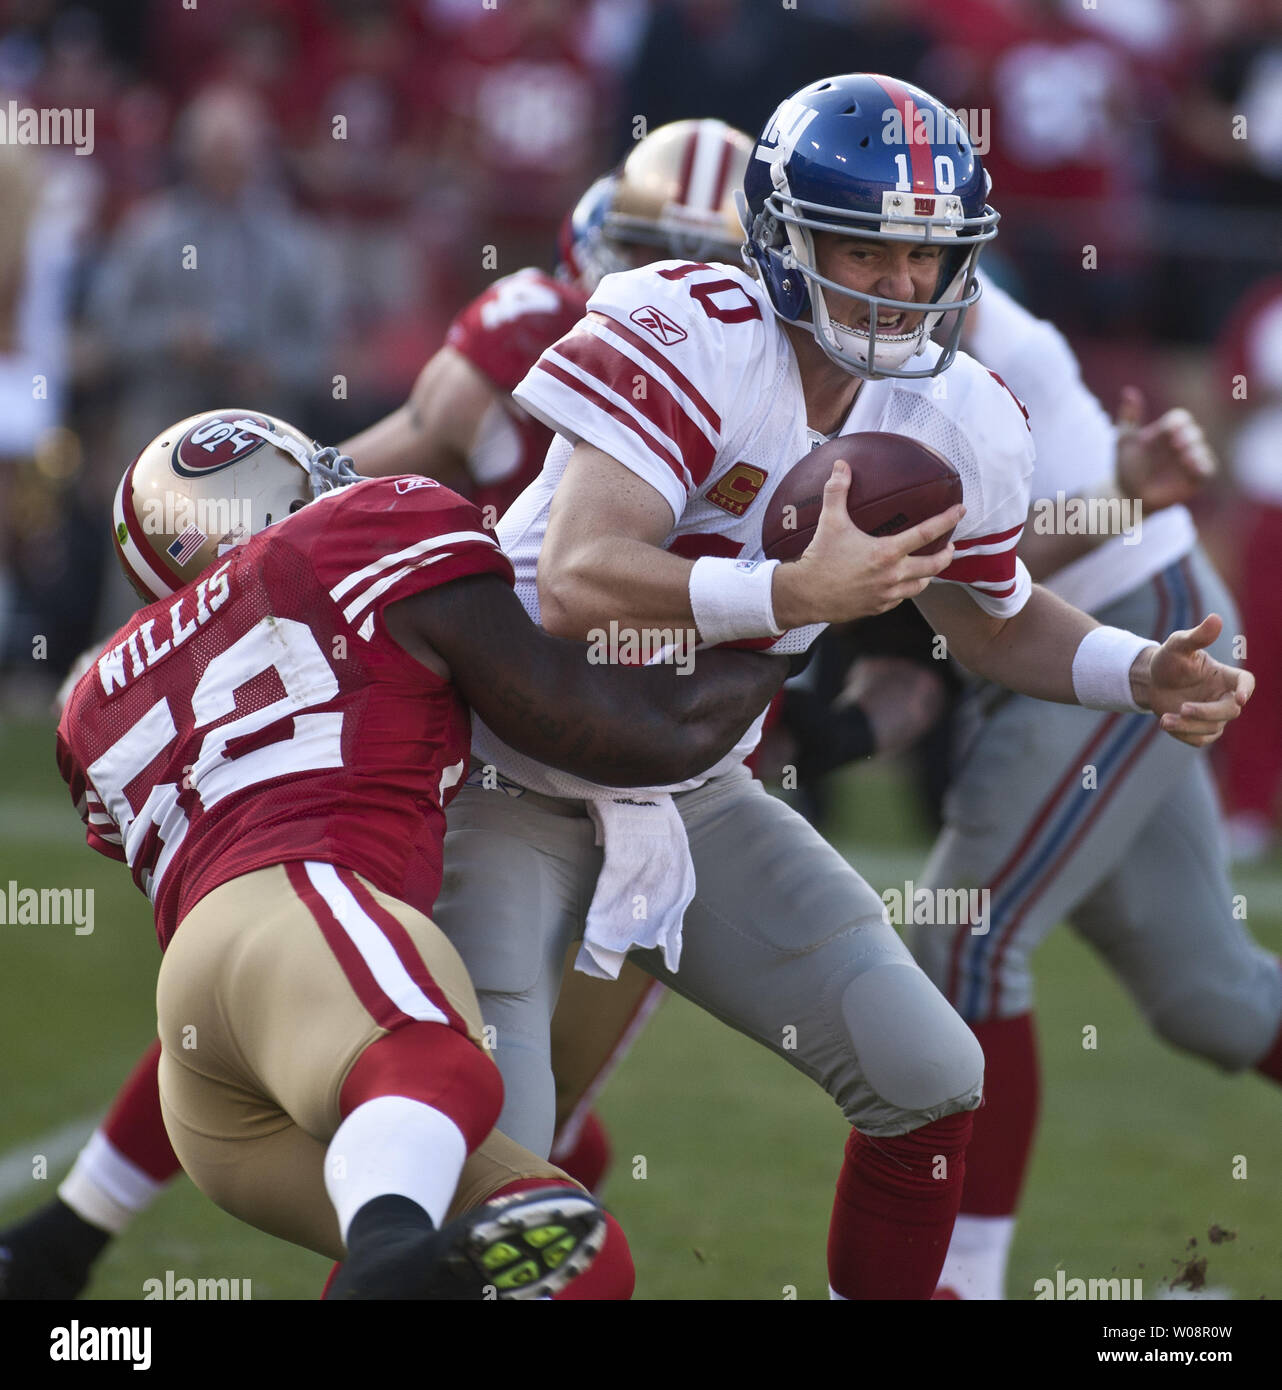 New York Giants QB Eli Manning (10) is sacked by San Francisco 49ers Patrick Willis at Candlestick Park in San Francisco on November 13, 2011.  The 49ers defeated the Giants 27-20.     UPI/Terry Schmitt Stock Photo